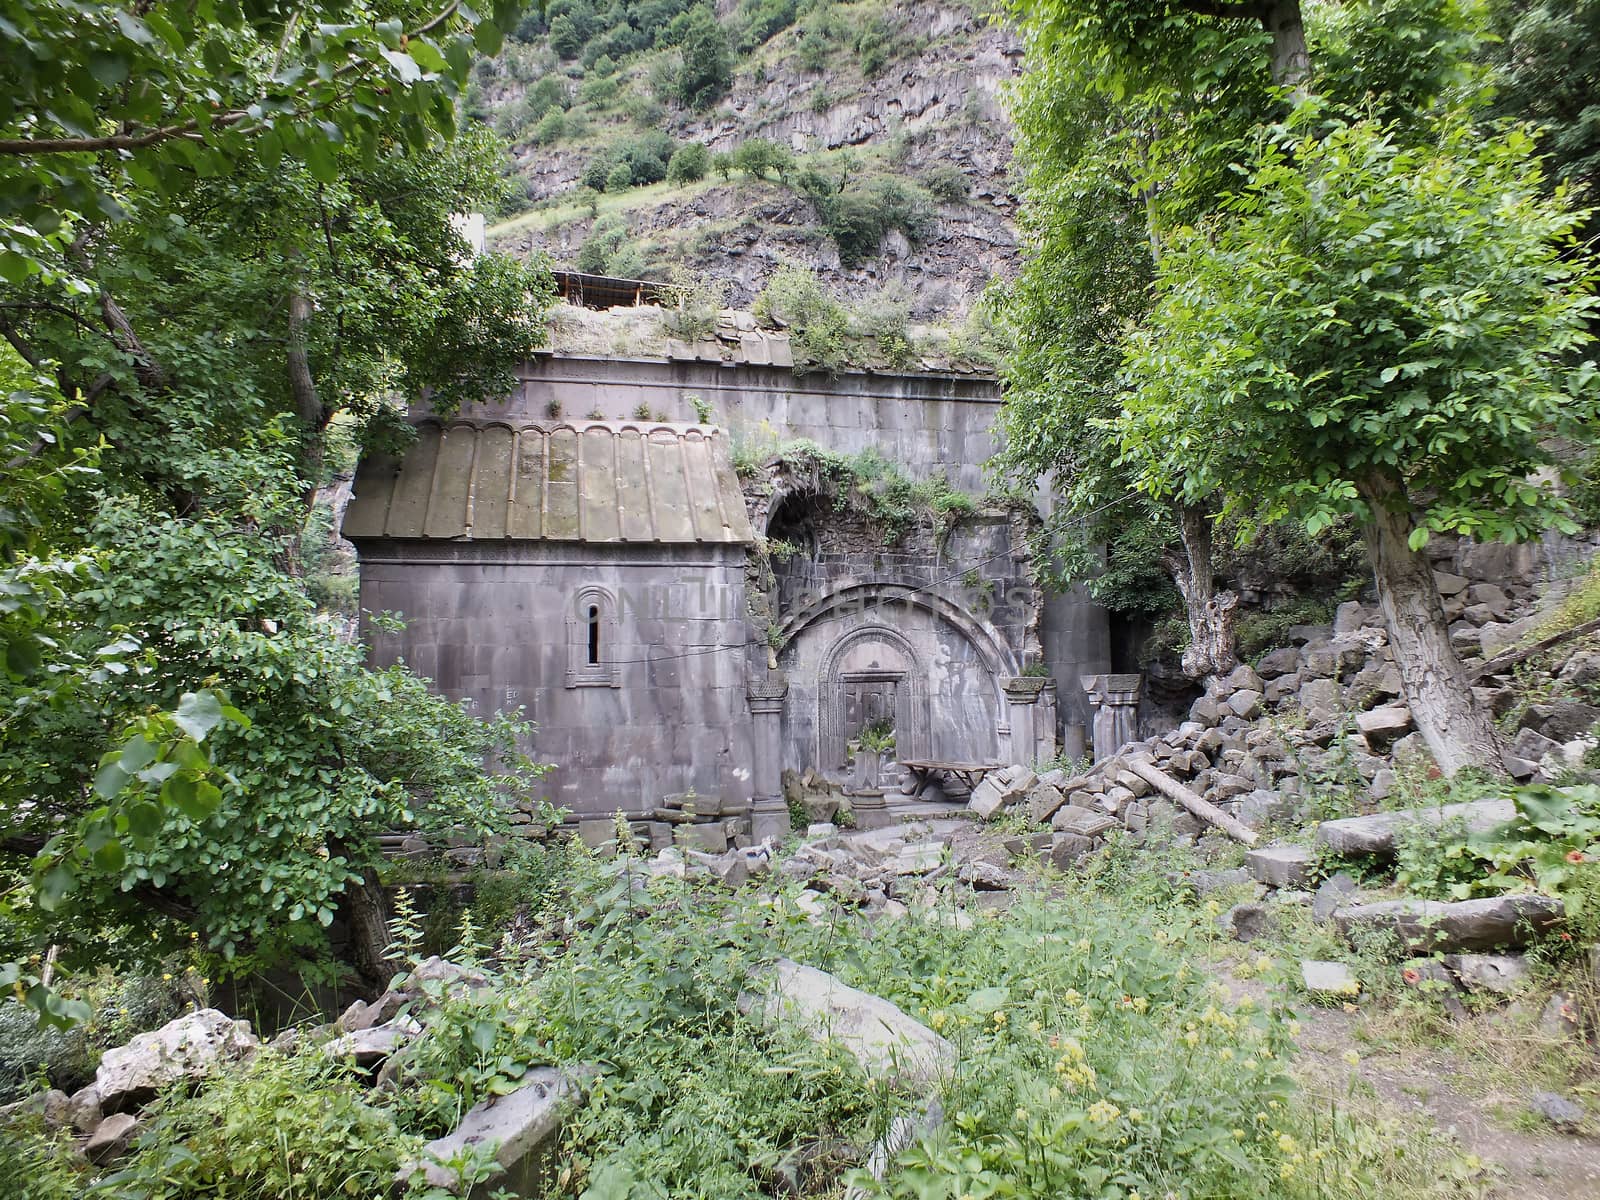 Kobayr is a 12th-century Armenian convent which was built on a brink of a deep gorge, in 1171. The site is currently being restored